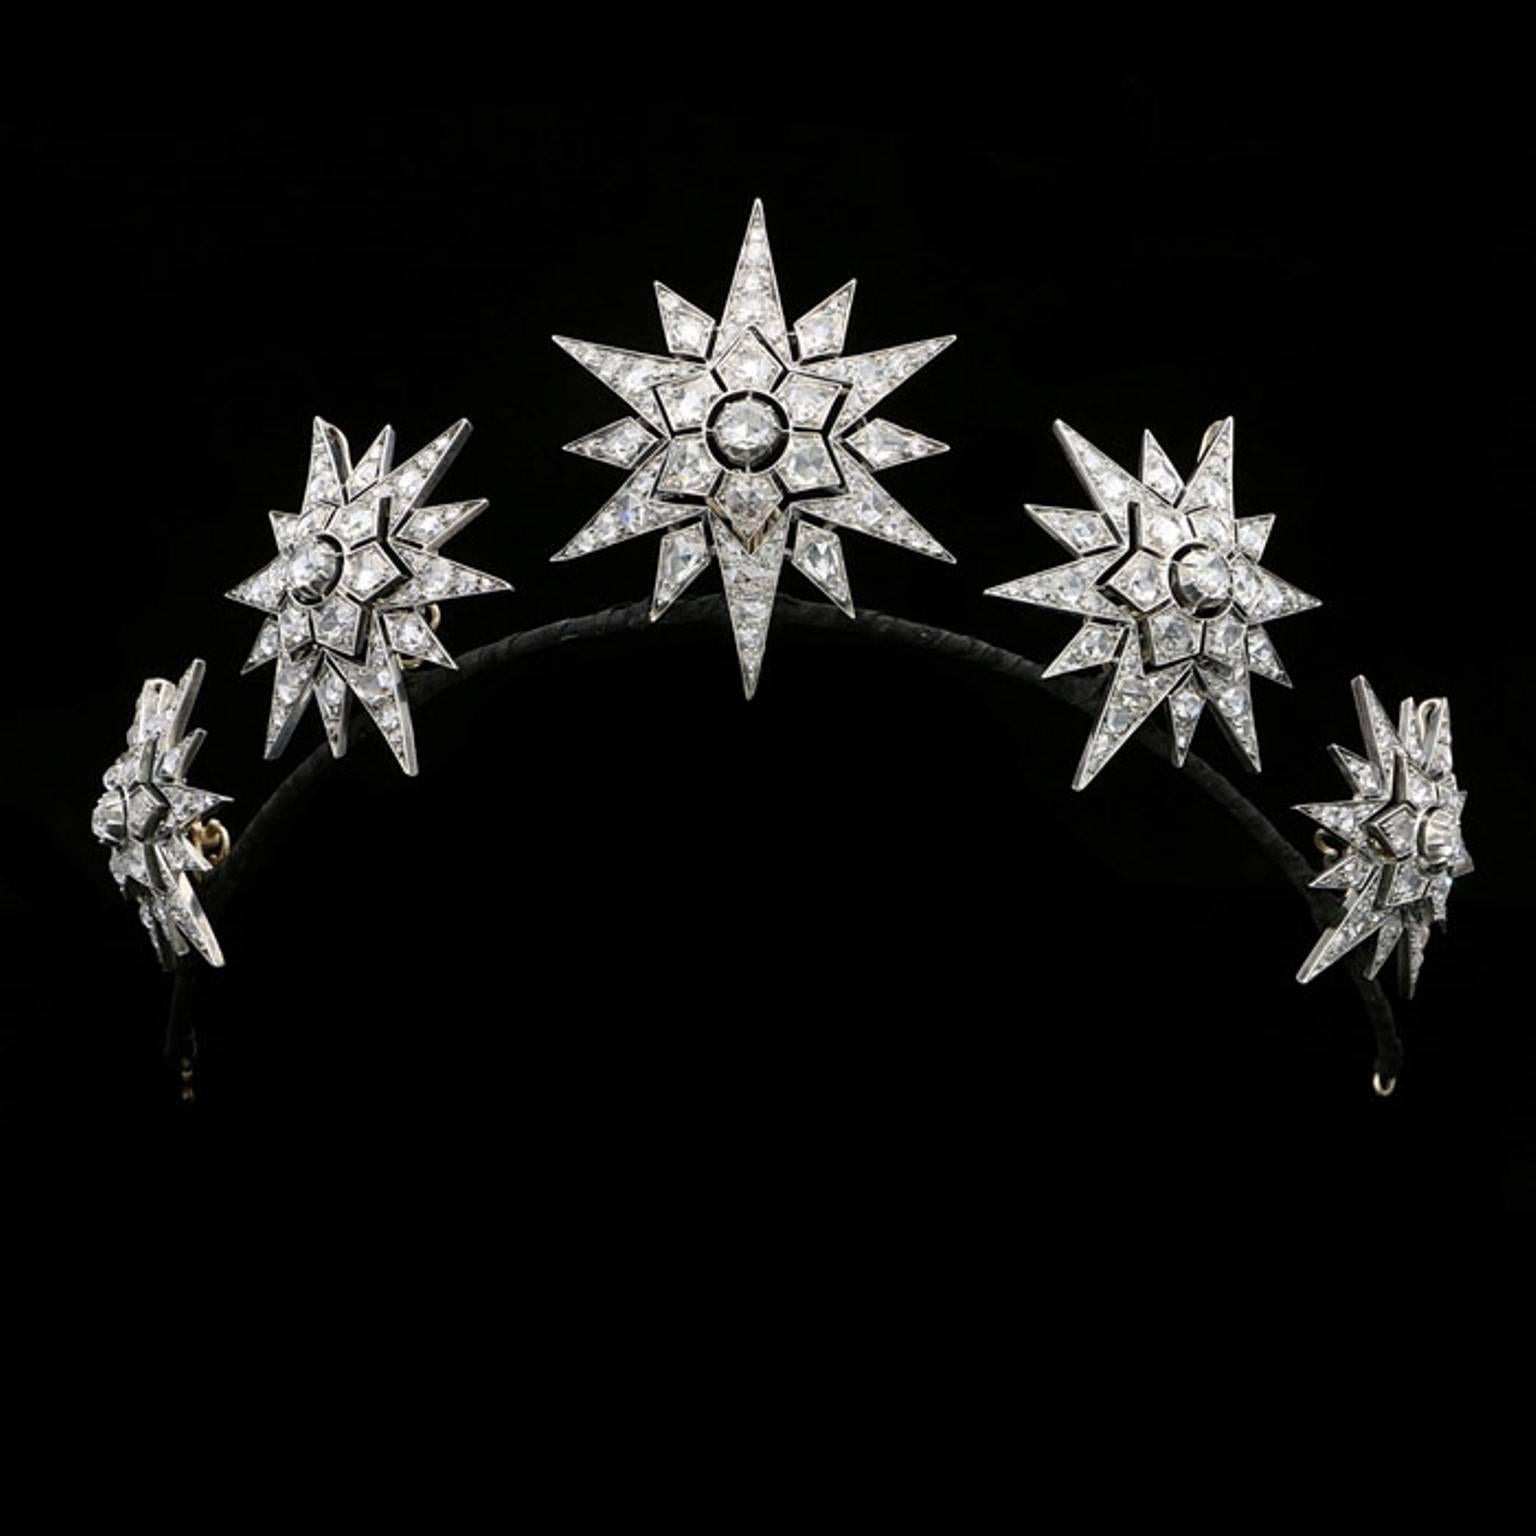 The tiara composed of five twelve-rayed stars graduated in size, all of openwork design and set throughout with rose-cut diamonds, all detachable and with pendant loops and separate brooch fittings for ease and flexibility of wear making this a